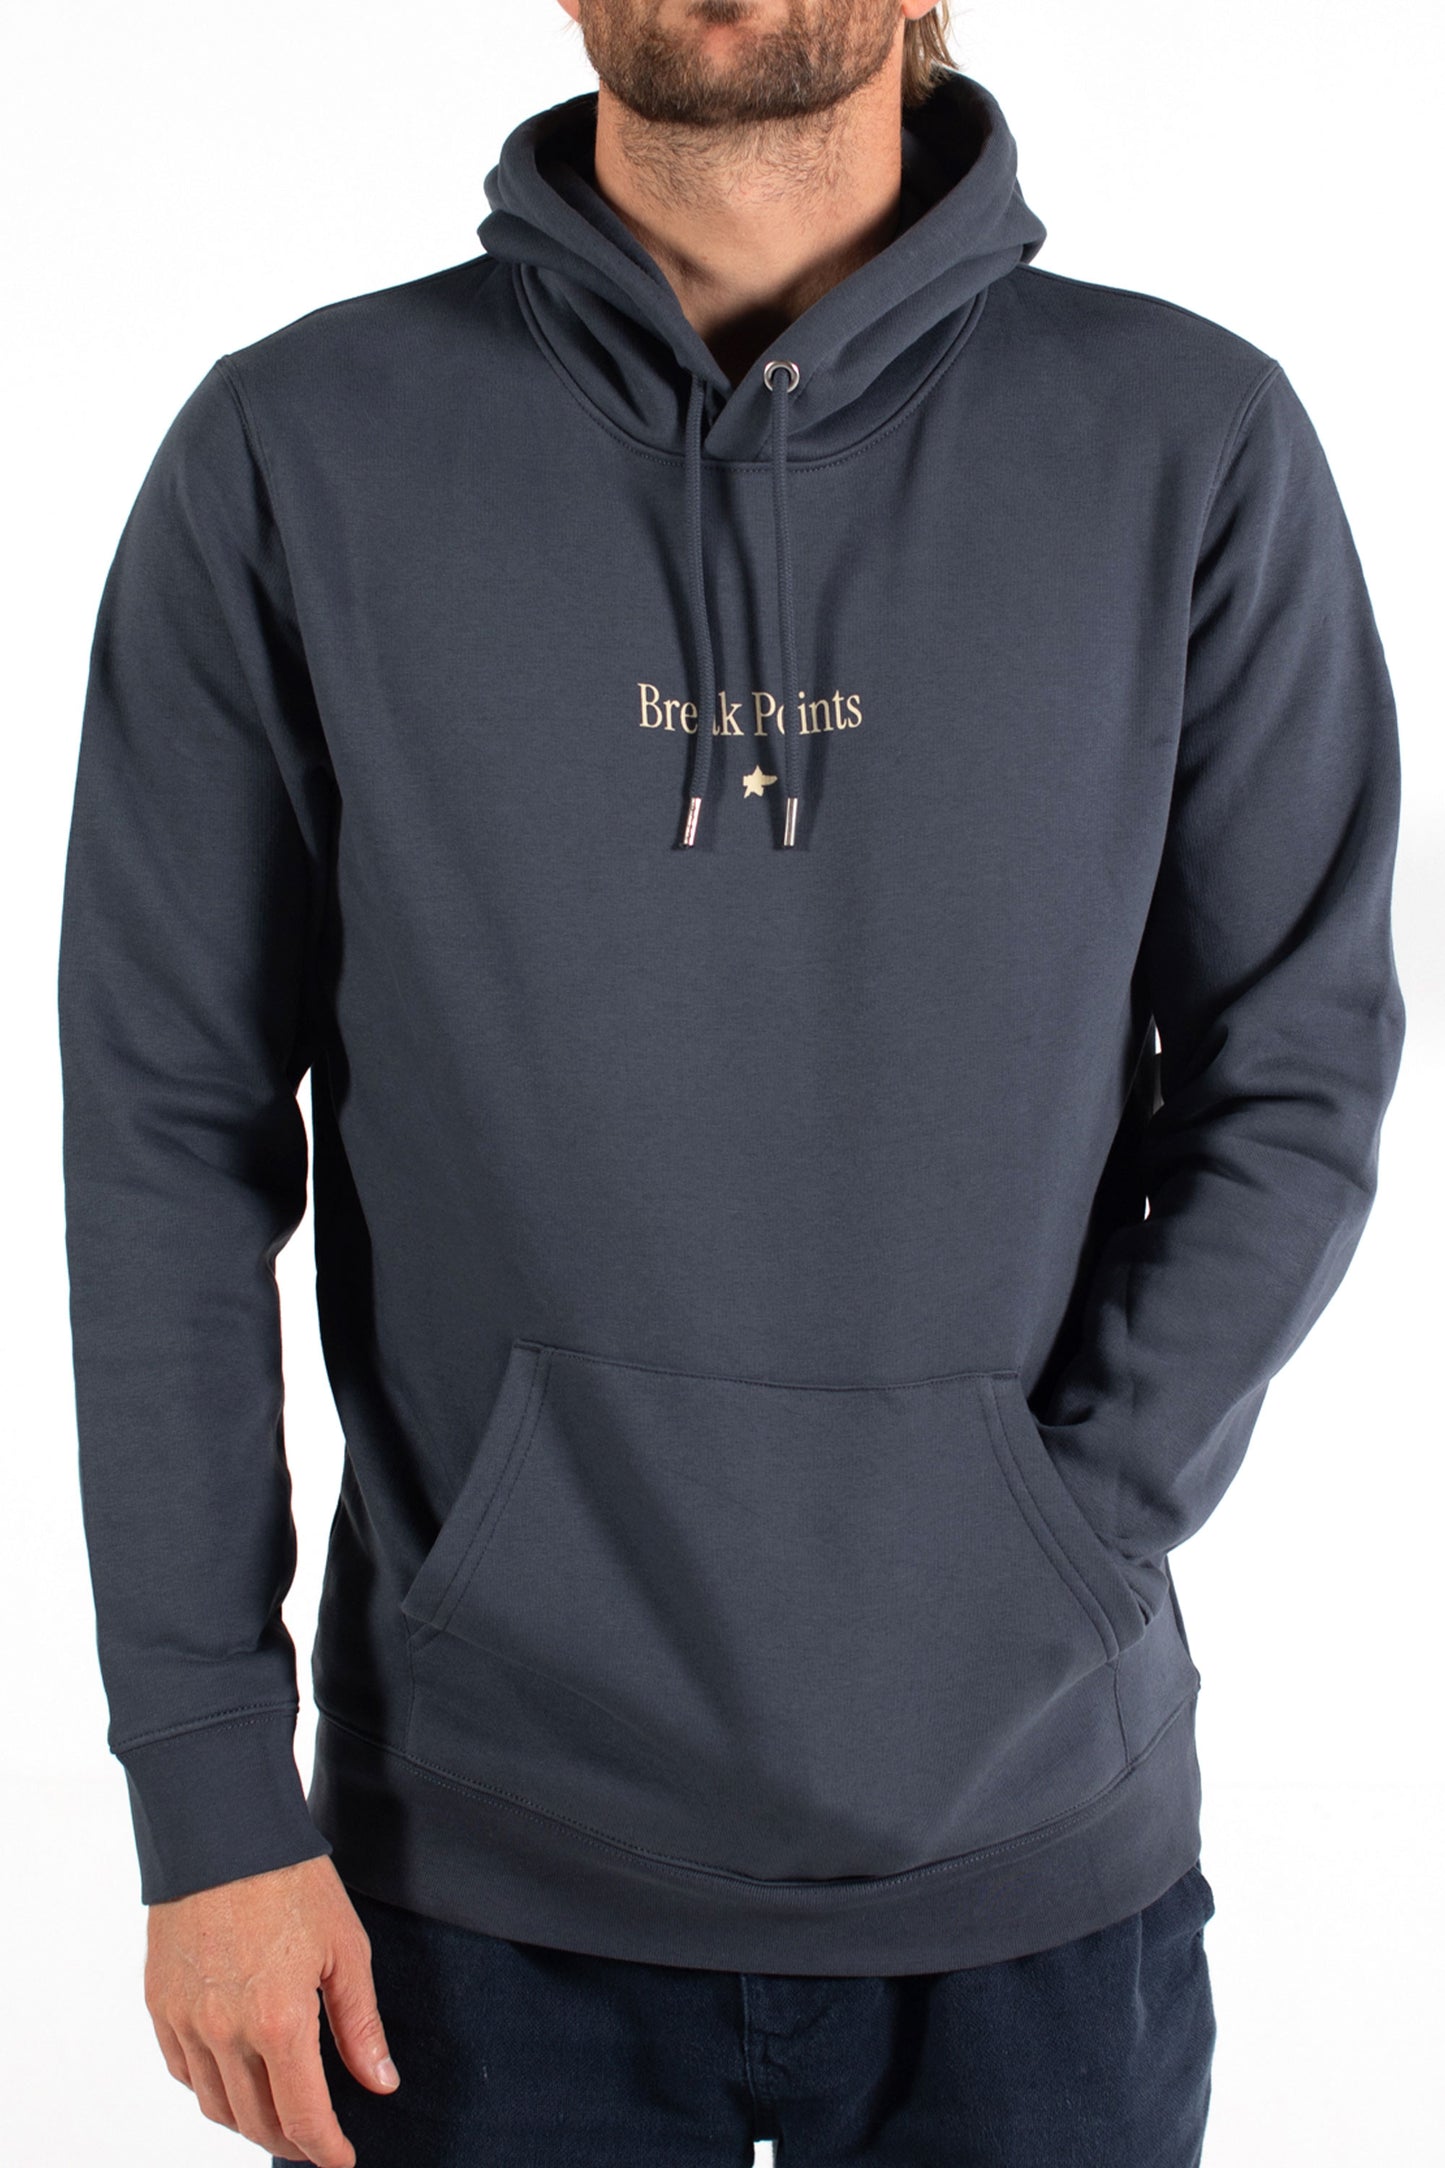 Pukas-Surf-Shop-surfing-the-basque-country-hoodie-break-points